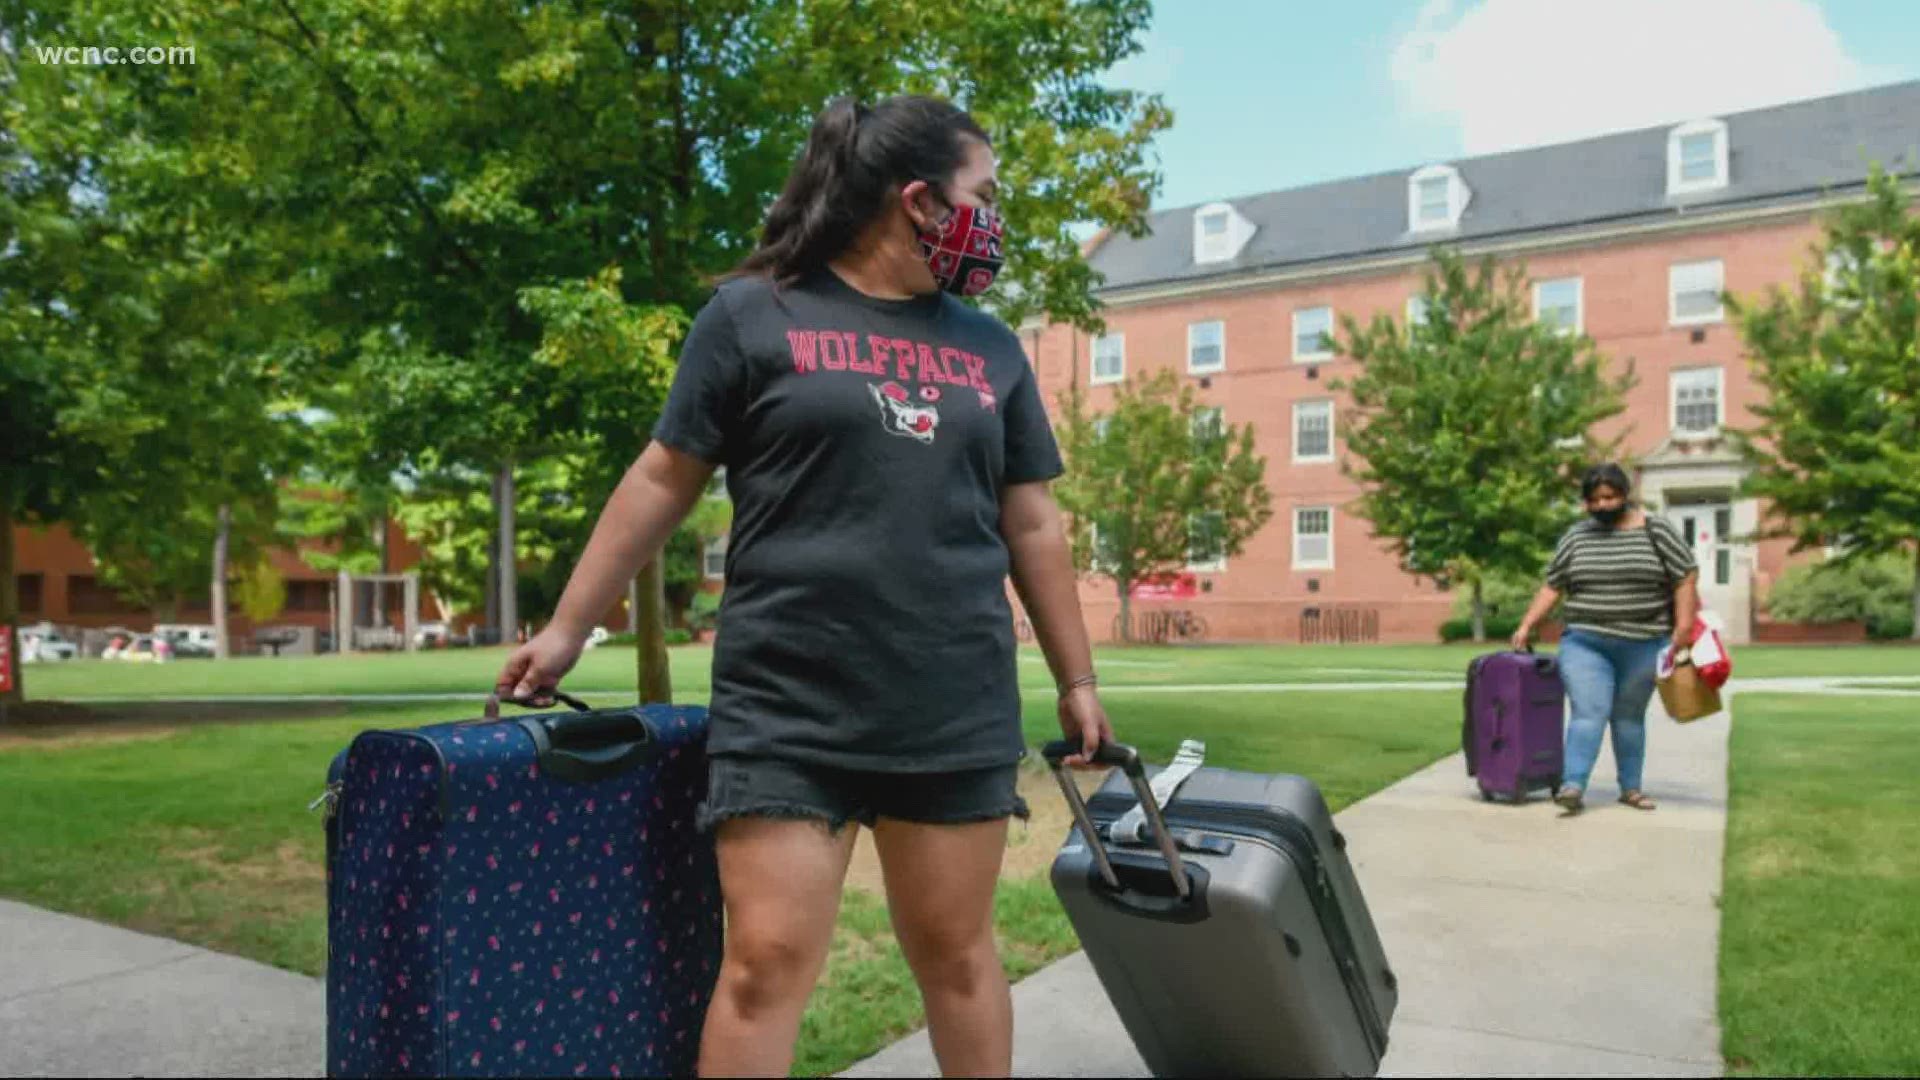 Things are looking very different this year as college students return to campus for this coming fall semester.